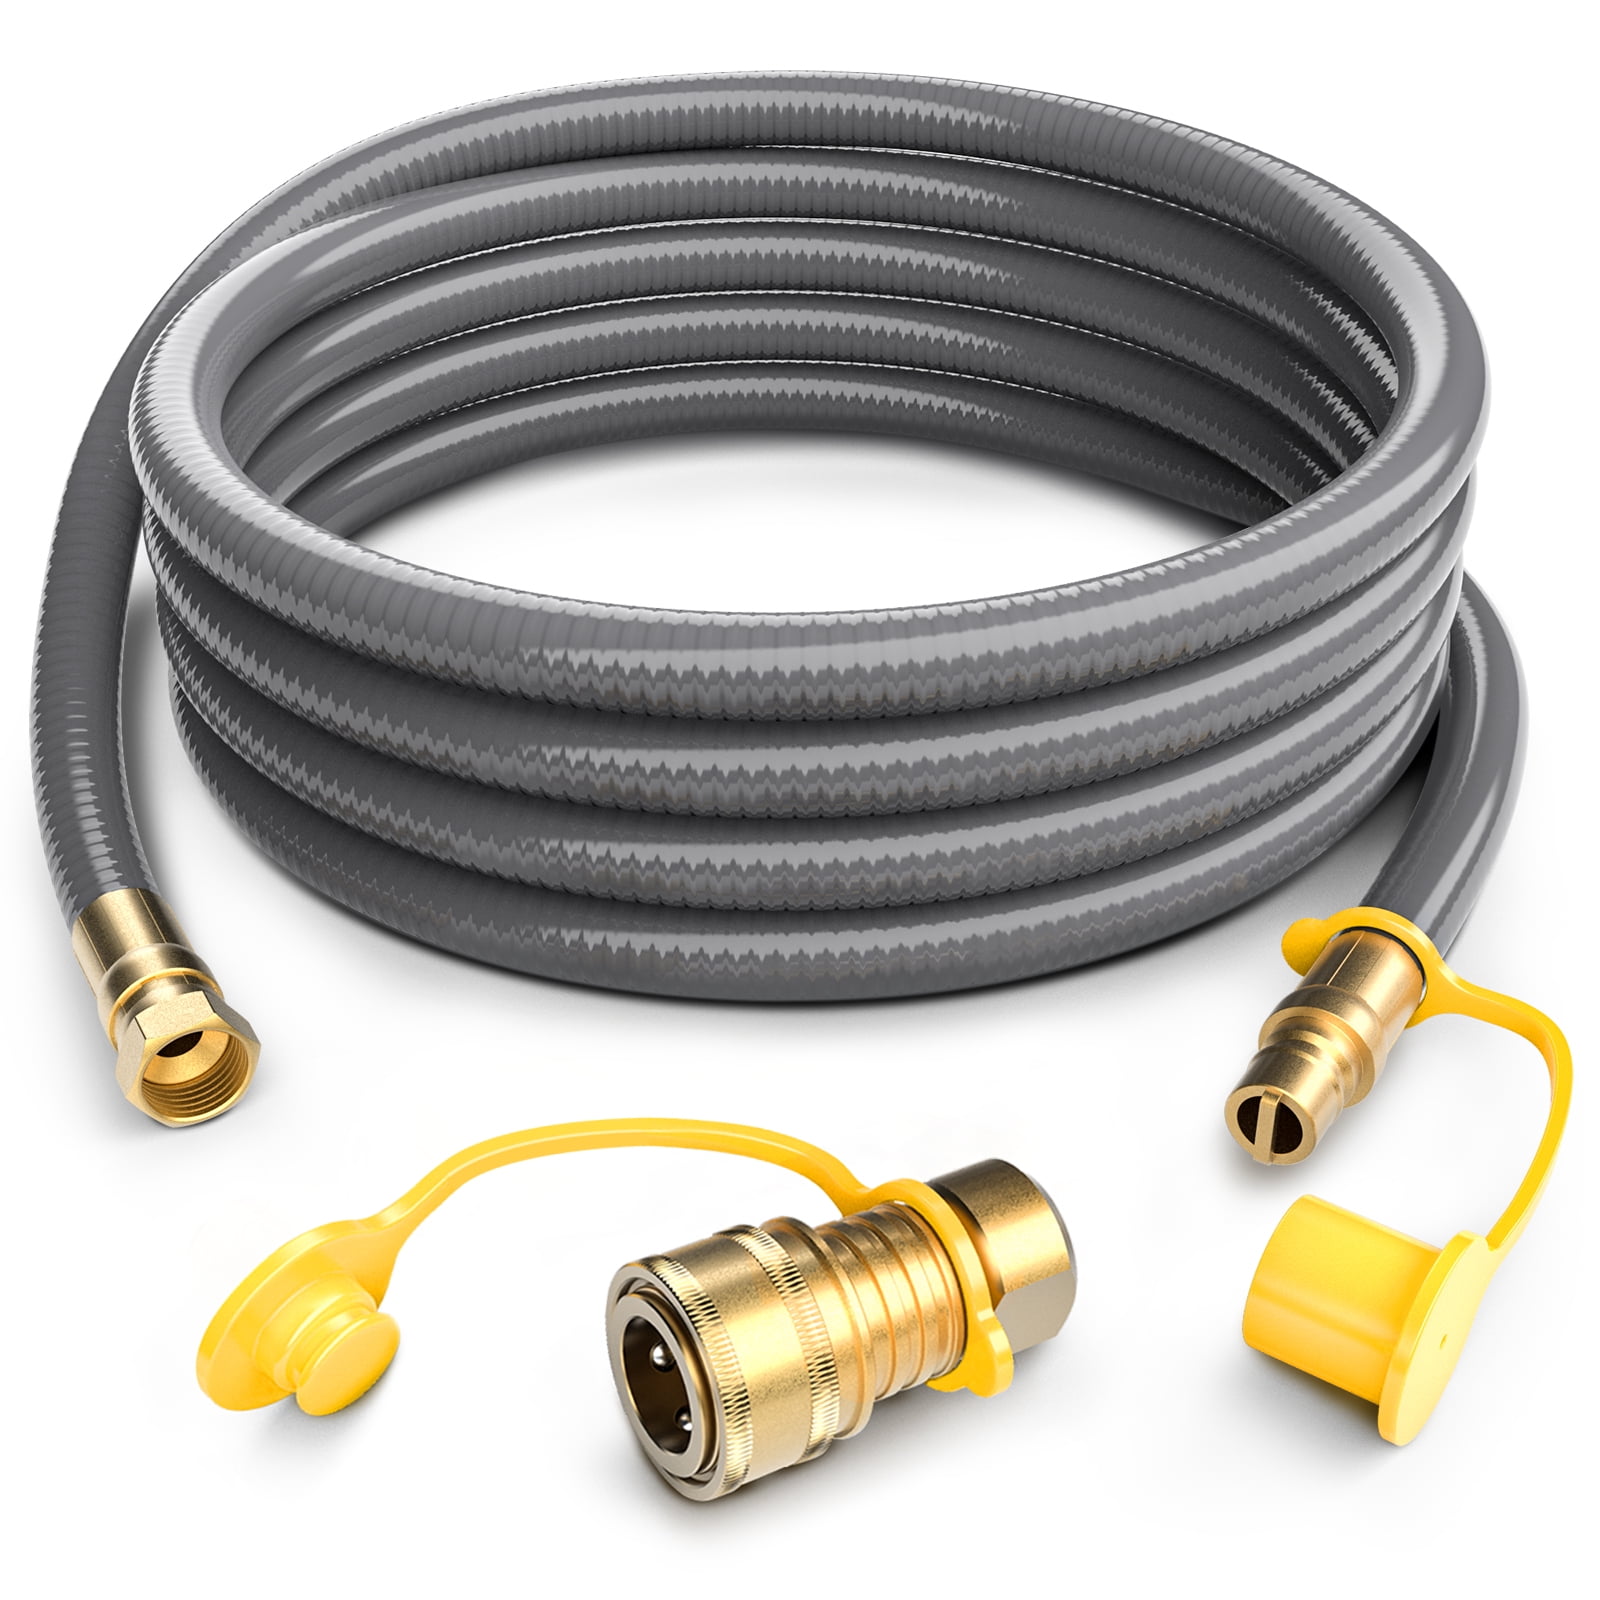 DurableBrass 3/8'' NPT-Natural Gas Quick-Connect Fittings Propane Hose Connector 